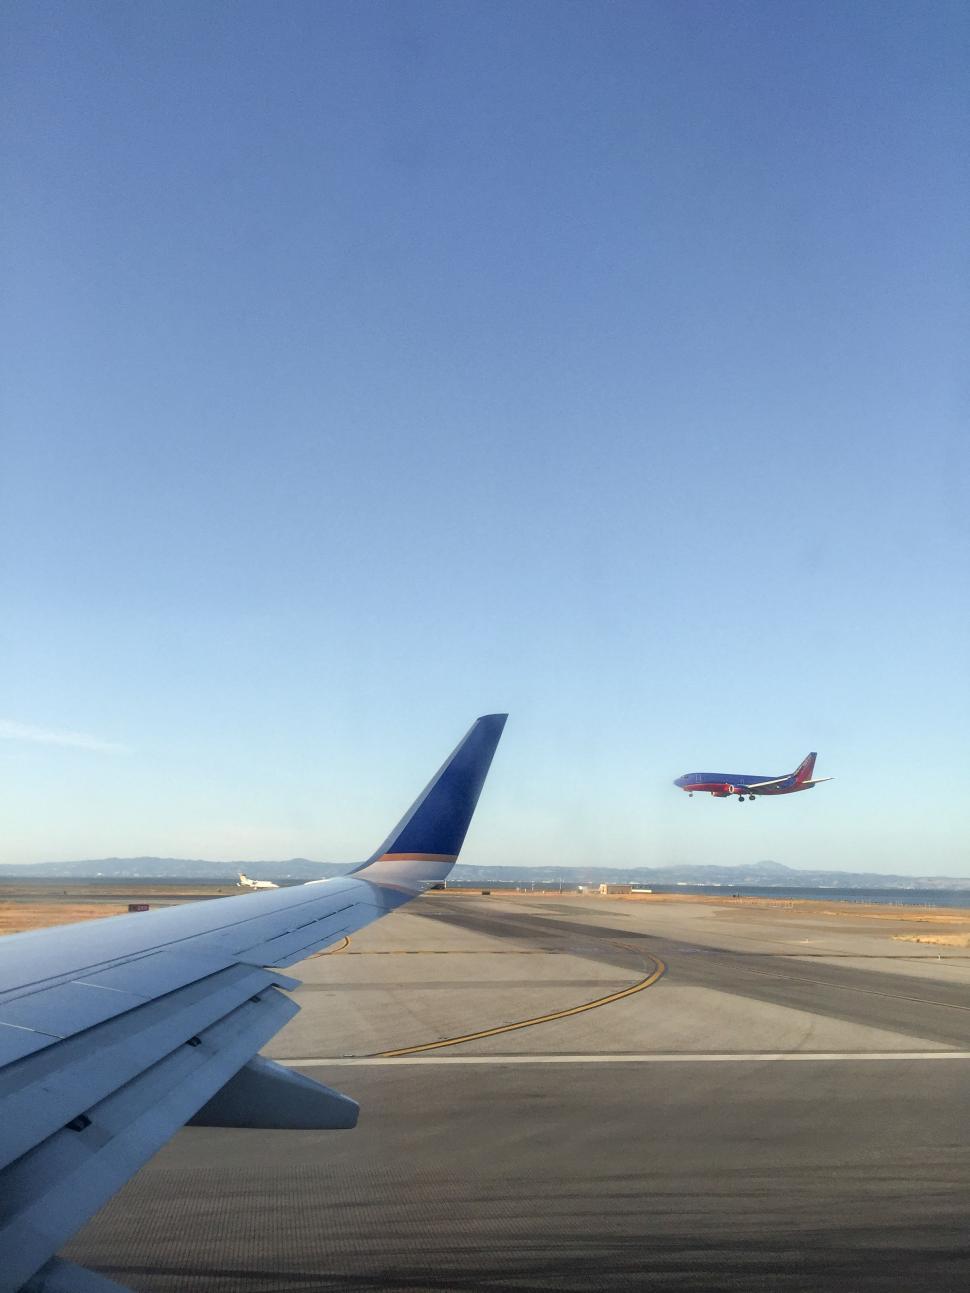 Free Image of Airplane wing and taking off aircraft 